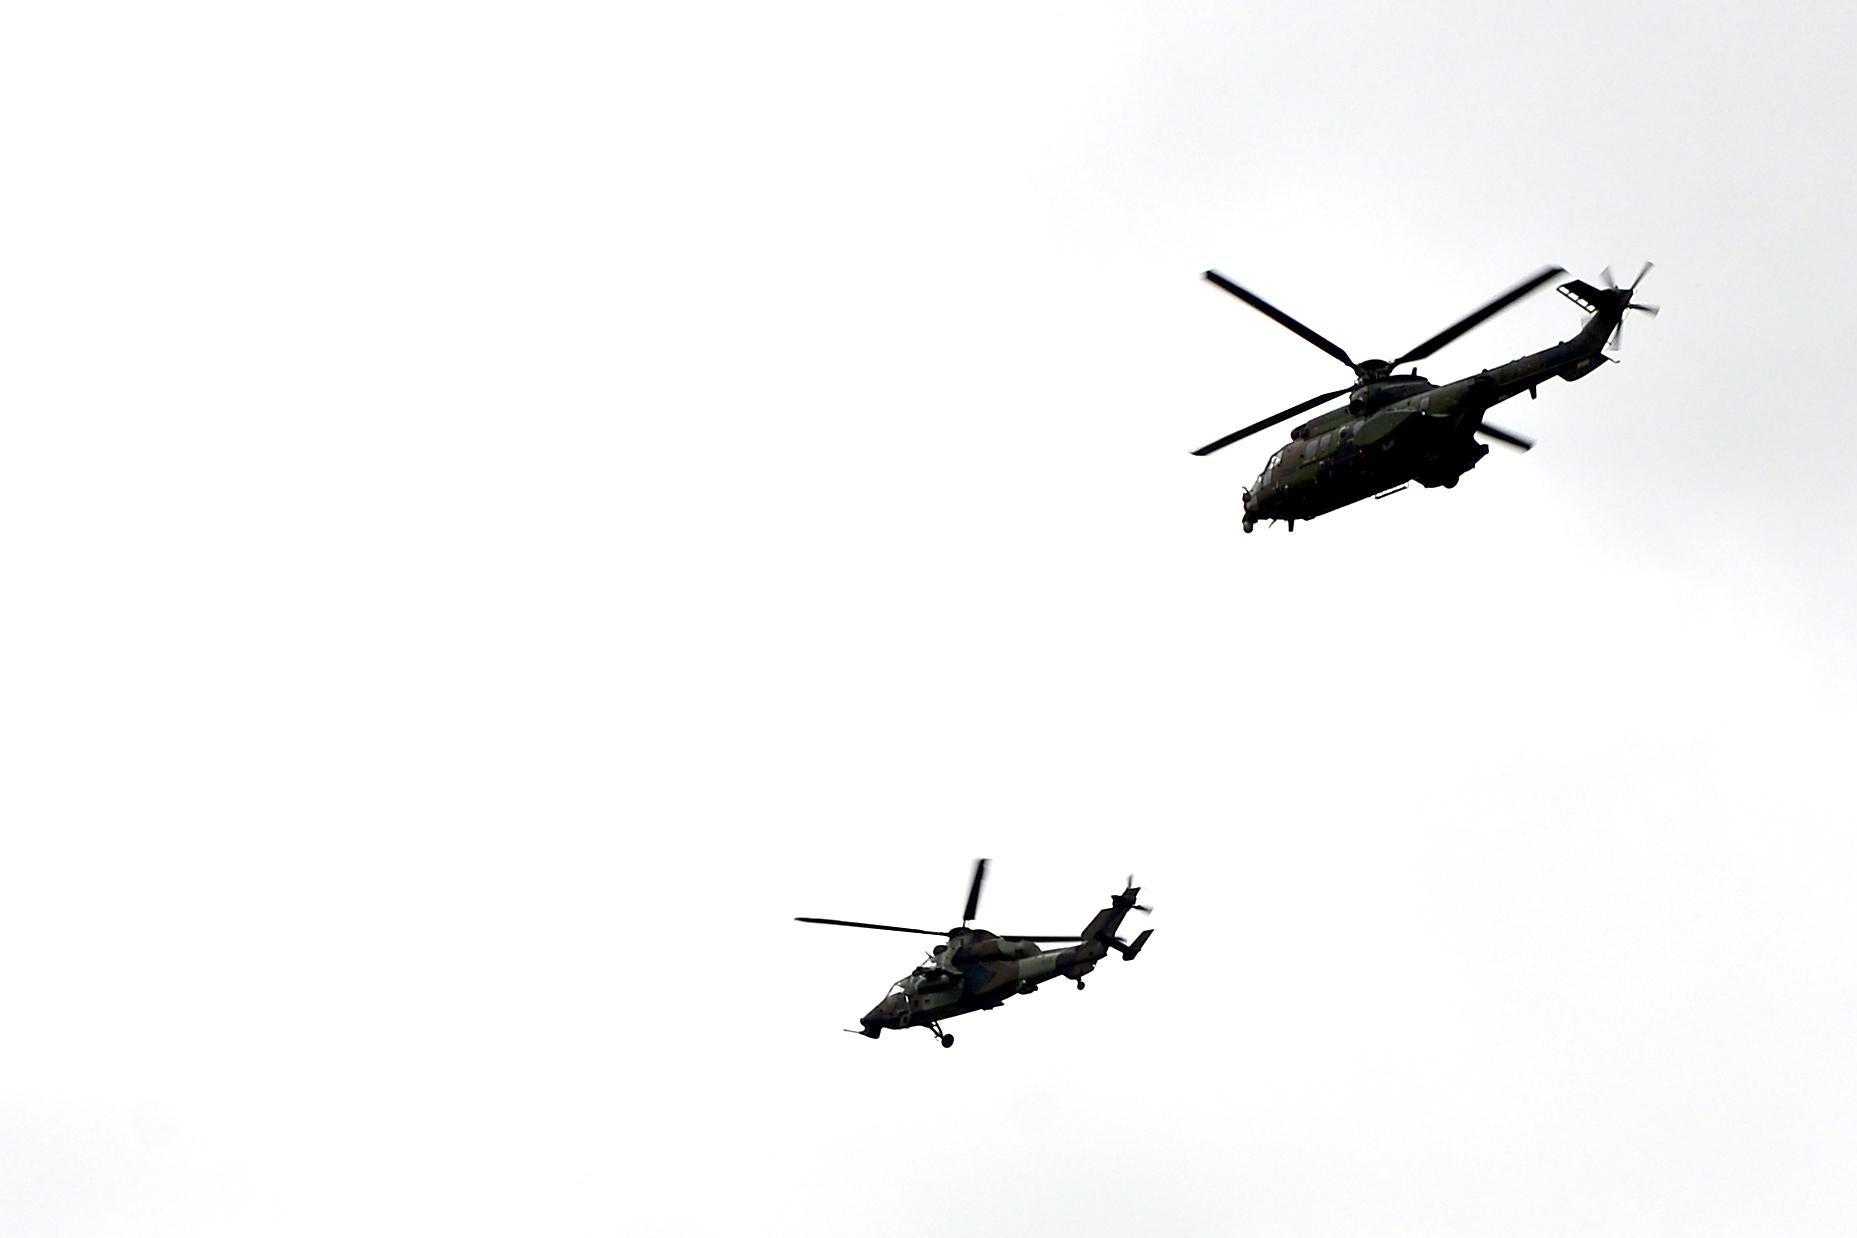 French Army helicopters fly past during a ceremony of seven French soldiers of the 5th RHC (Fighter Helicopter Regiment) died in a helicopter collision in Mali, in Pau-Uzein on December 03 2019, southwestern France. - The soldiers died when two helicopters collided last Monday while pursuing jihadists in northern Mali, where militant violence has soared in recent months. (Photo by Iroz Gaizka / AFP) (Photo by IROZ GAIZKA/AFP via Getty Images)